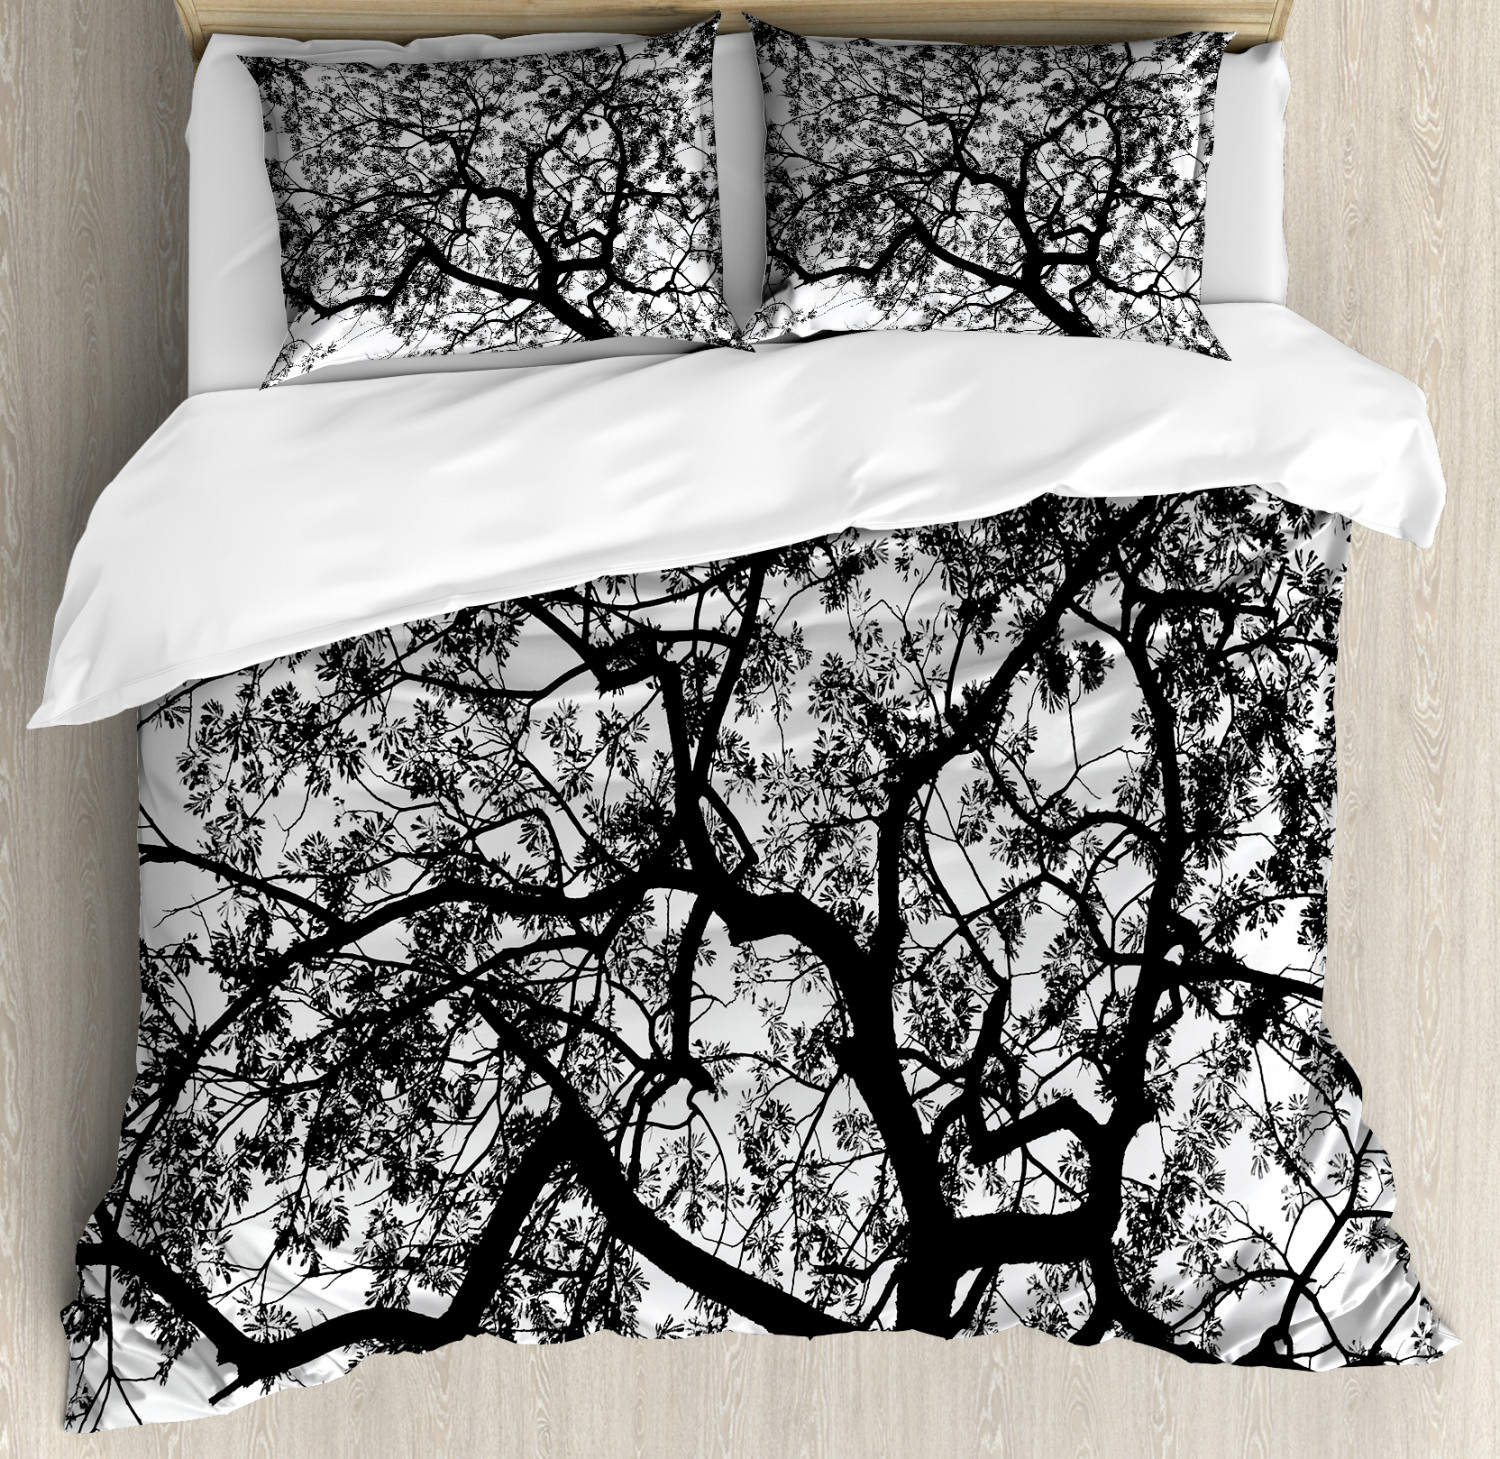 Nature Duvet Cover Set With Pillow Shams Spooky Black Tree Branch